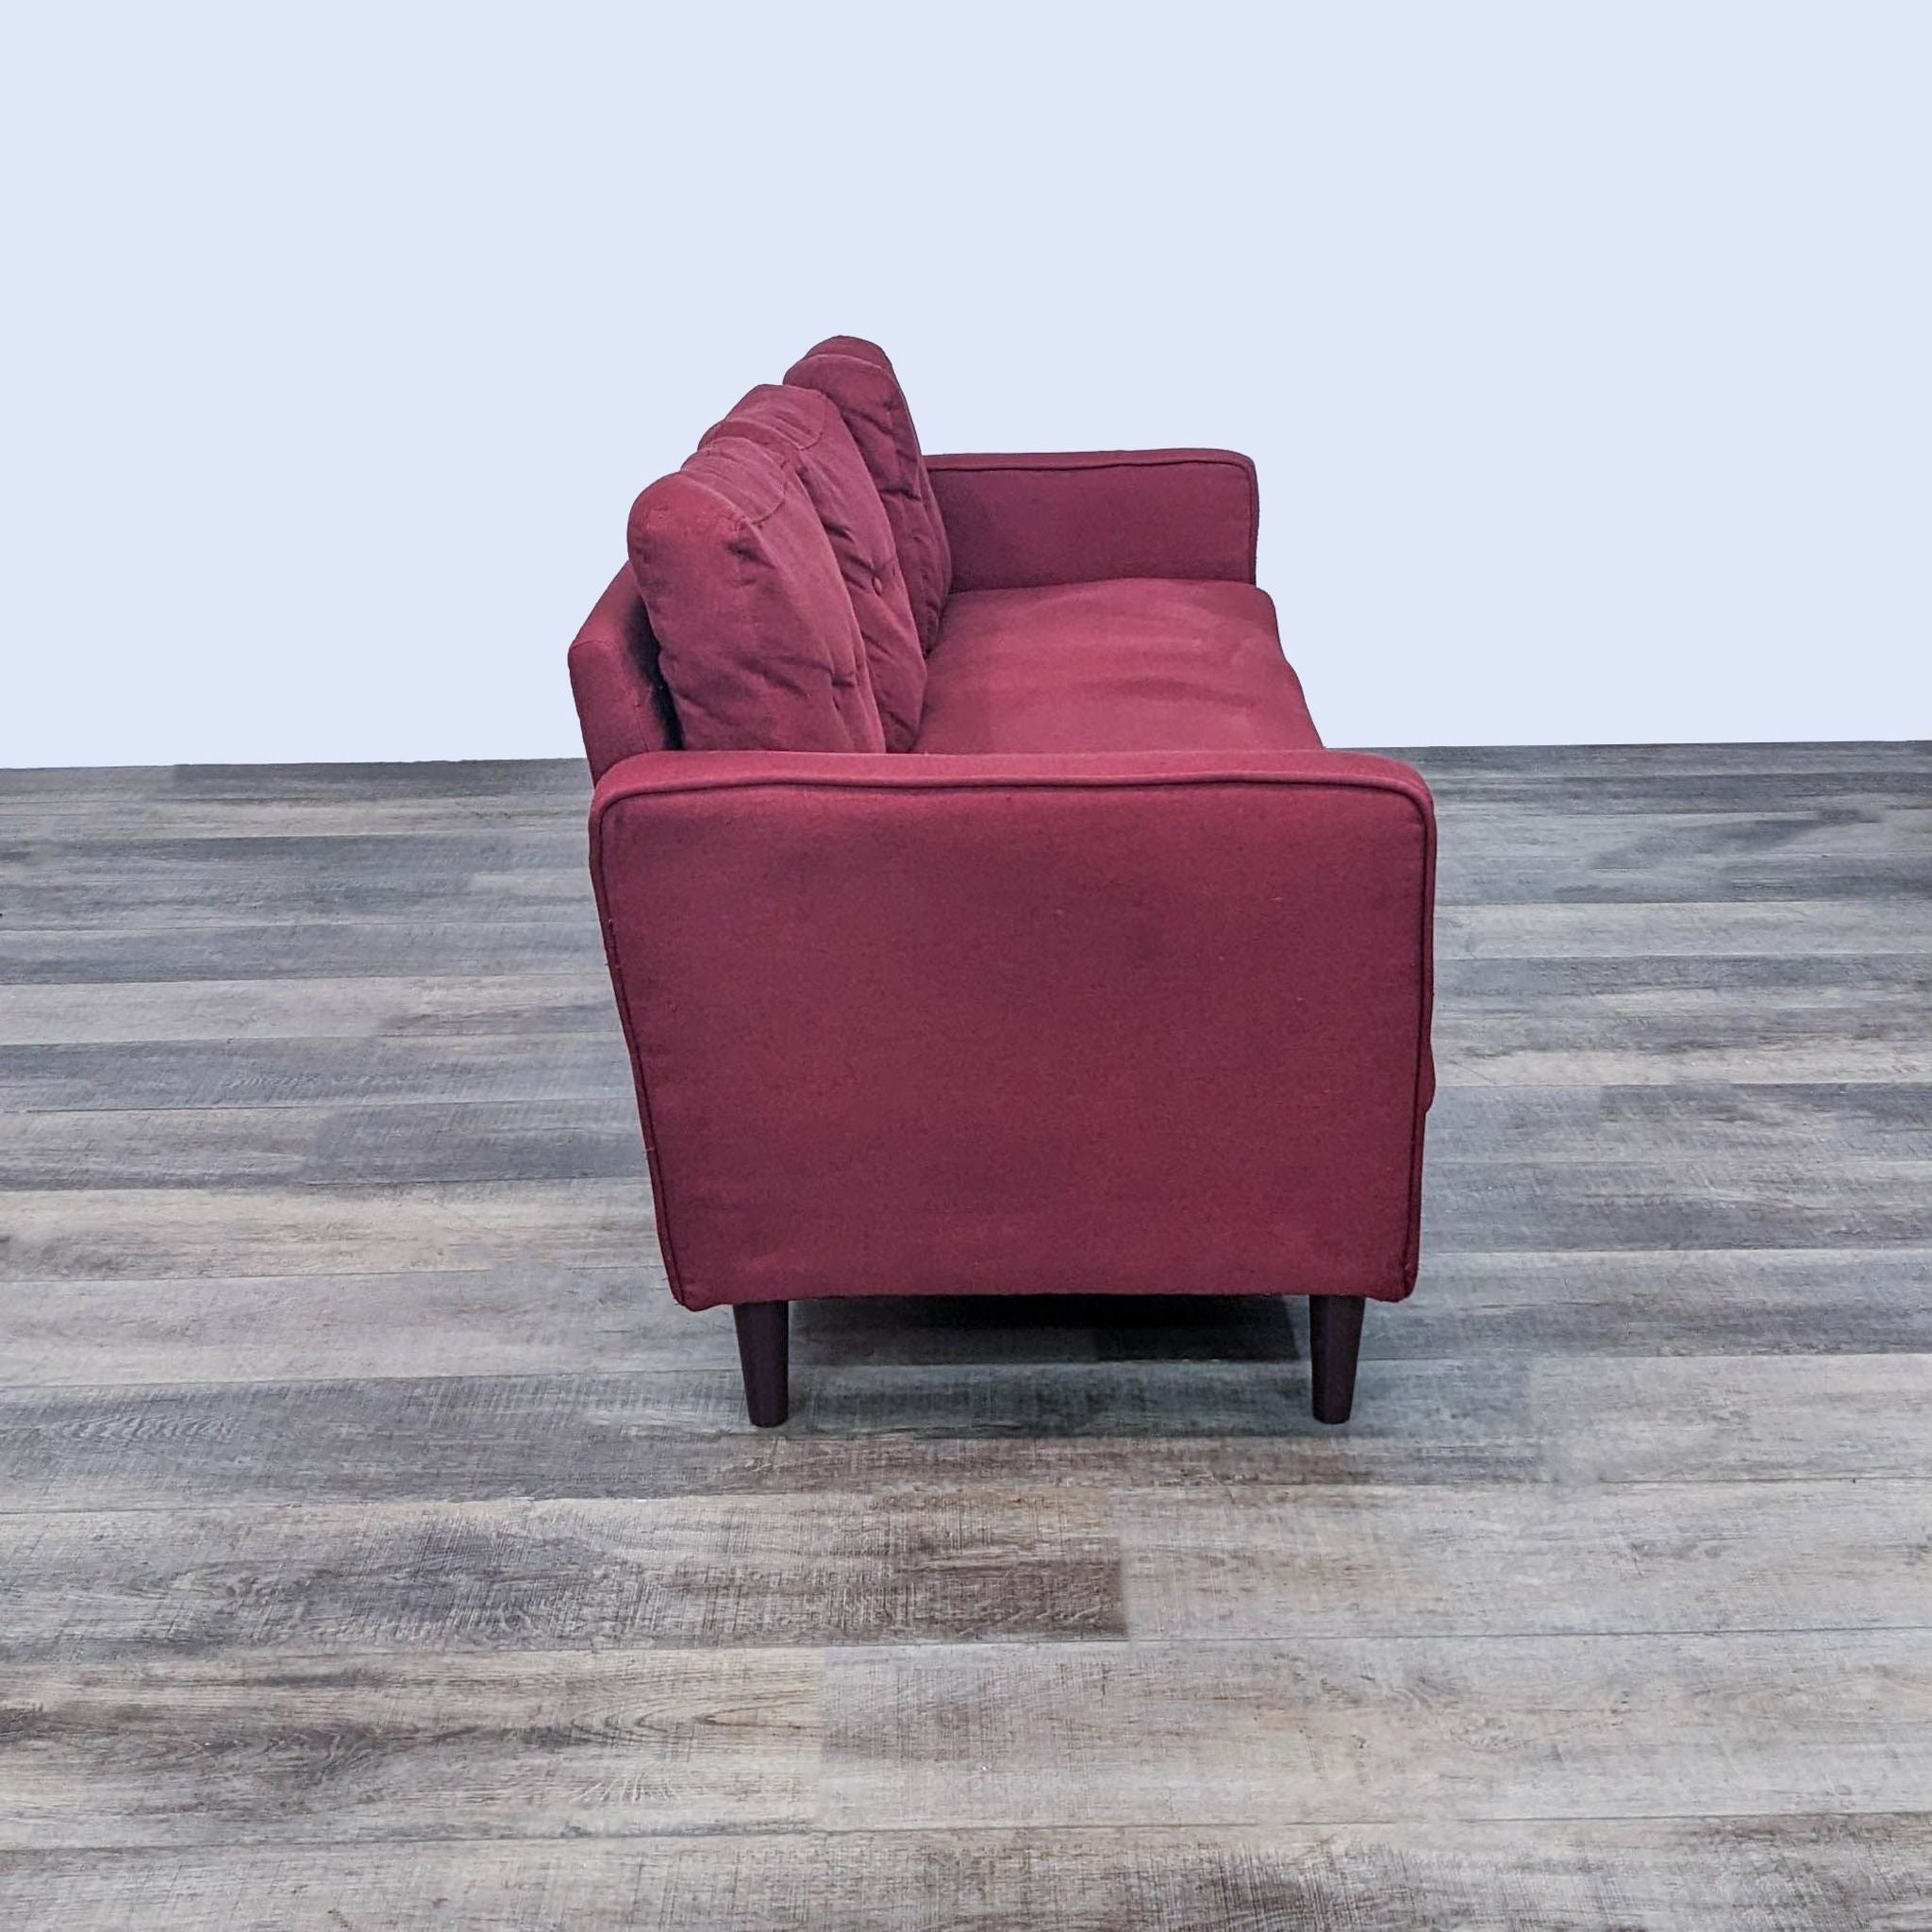 Side view of a Zinus brand 3-seat red button-back bench sofa with narrow arms and wooden legs on a wooden floor.